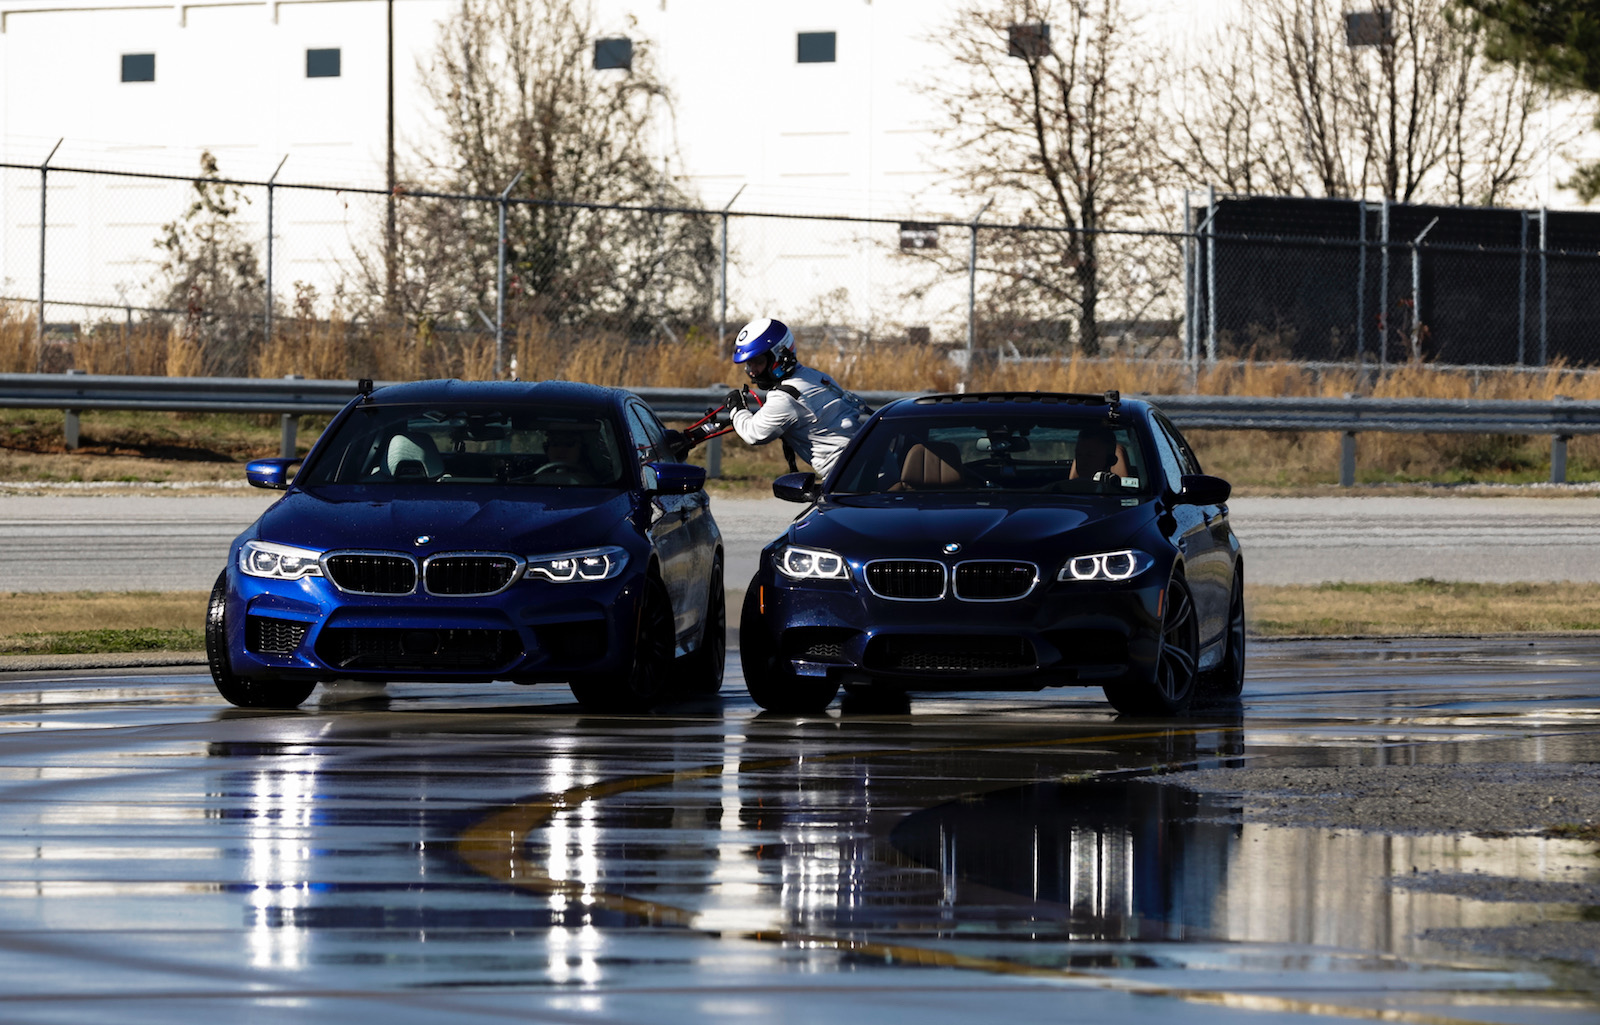 BMW M5 claims 2 Guinness World Records for long drift (video)